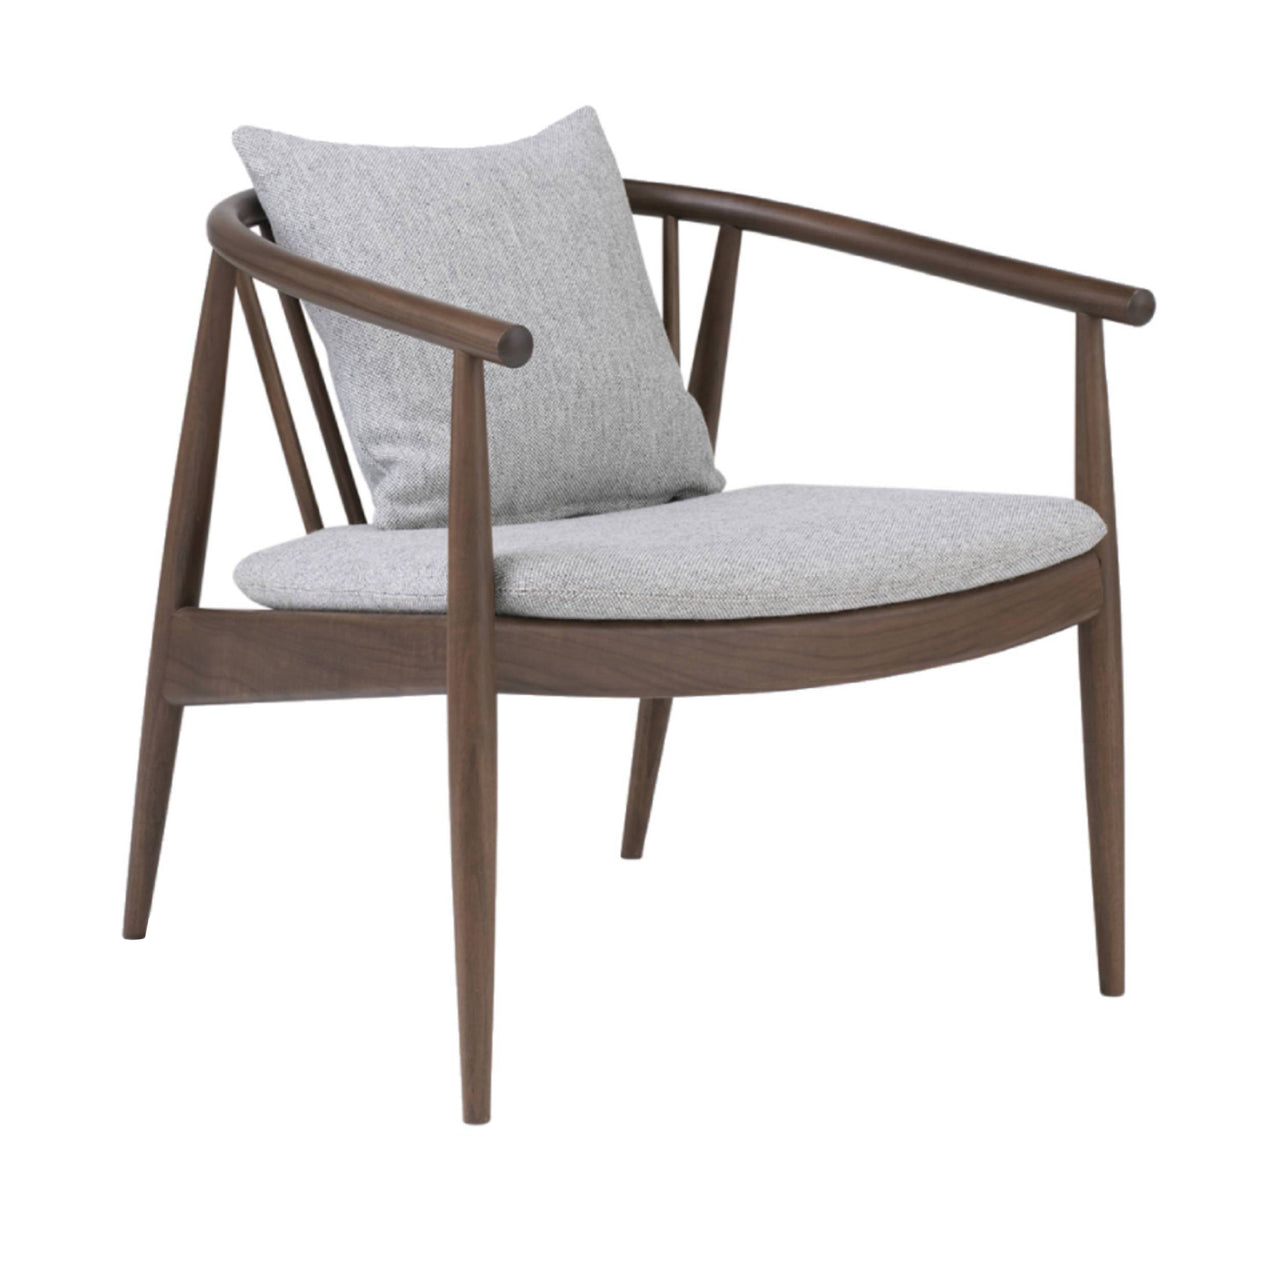 Reprise Chair: Upholstered + Natural Walnut + With Back Cushion